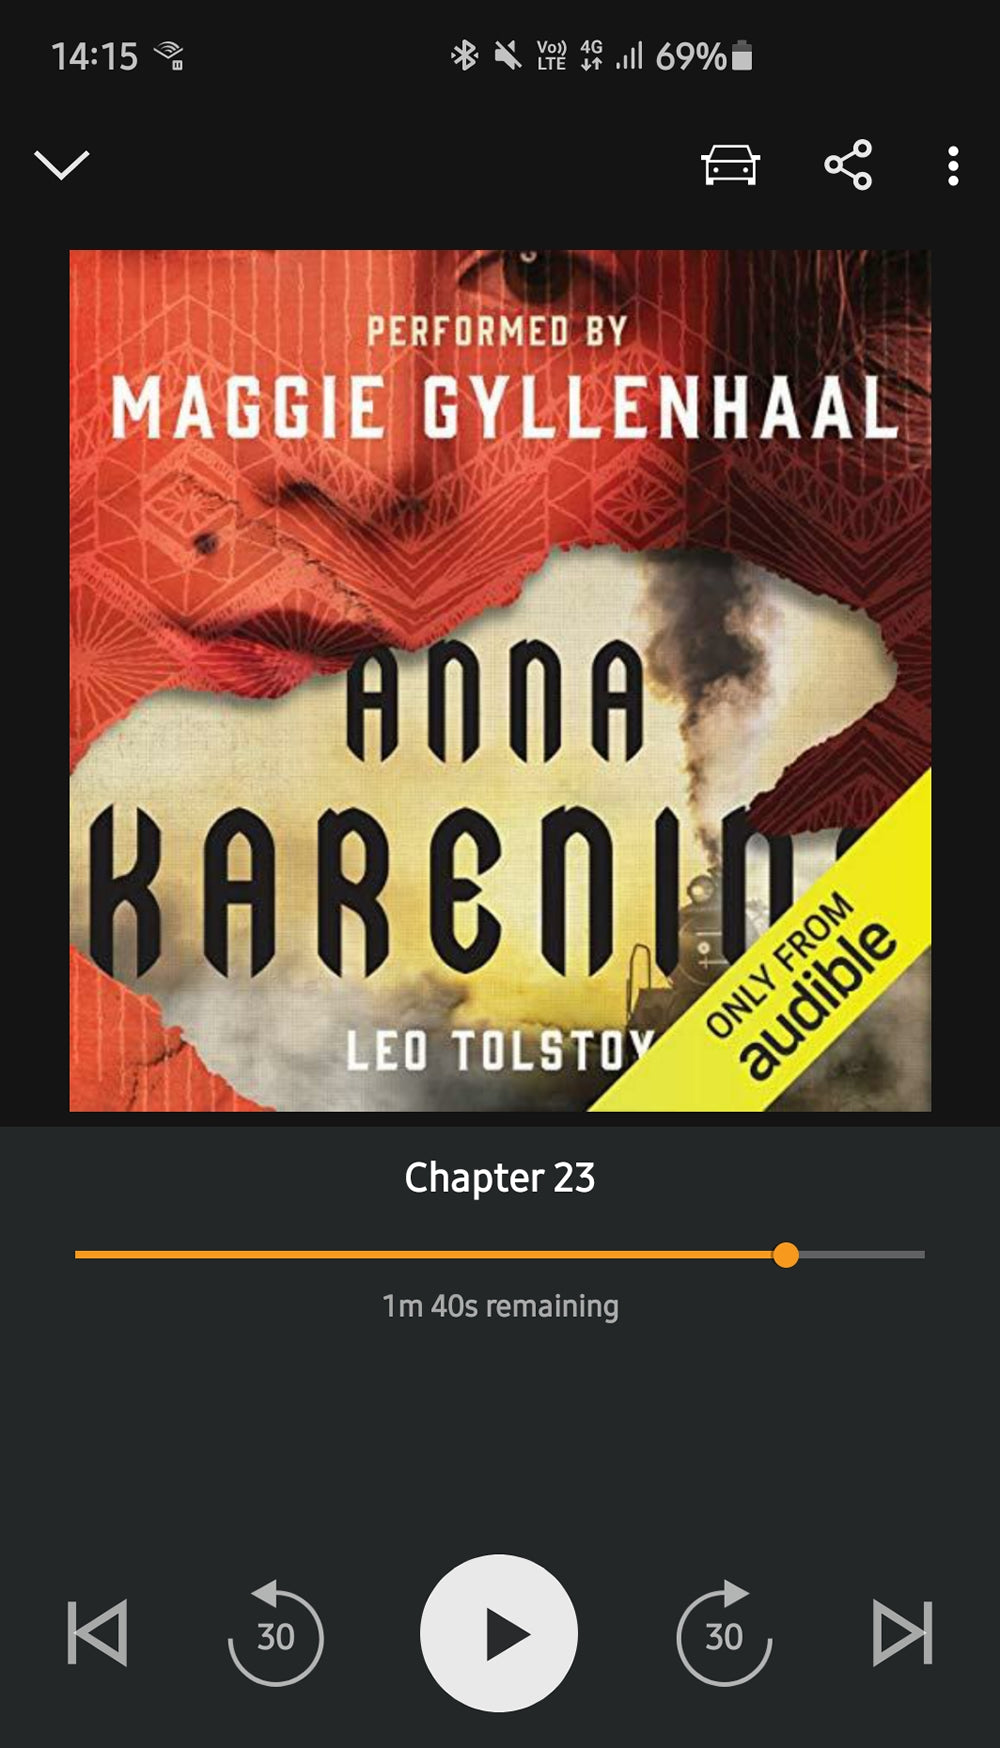 If You Are Bored And Love Literature But Still Don't Have The Time - Might I Recommend Anna Karenina Ready By Maggie Gyllenhaal On Audible